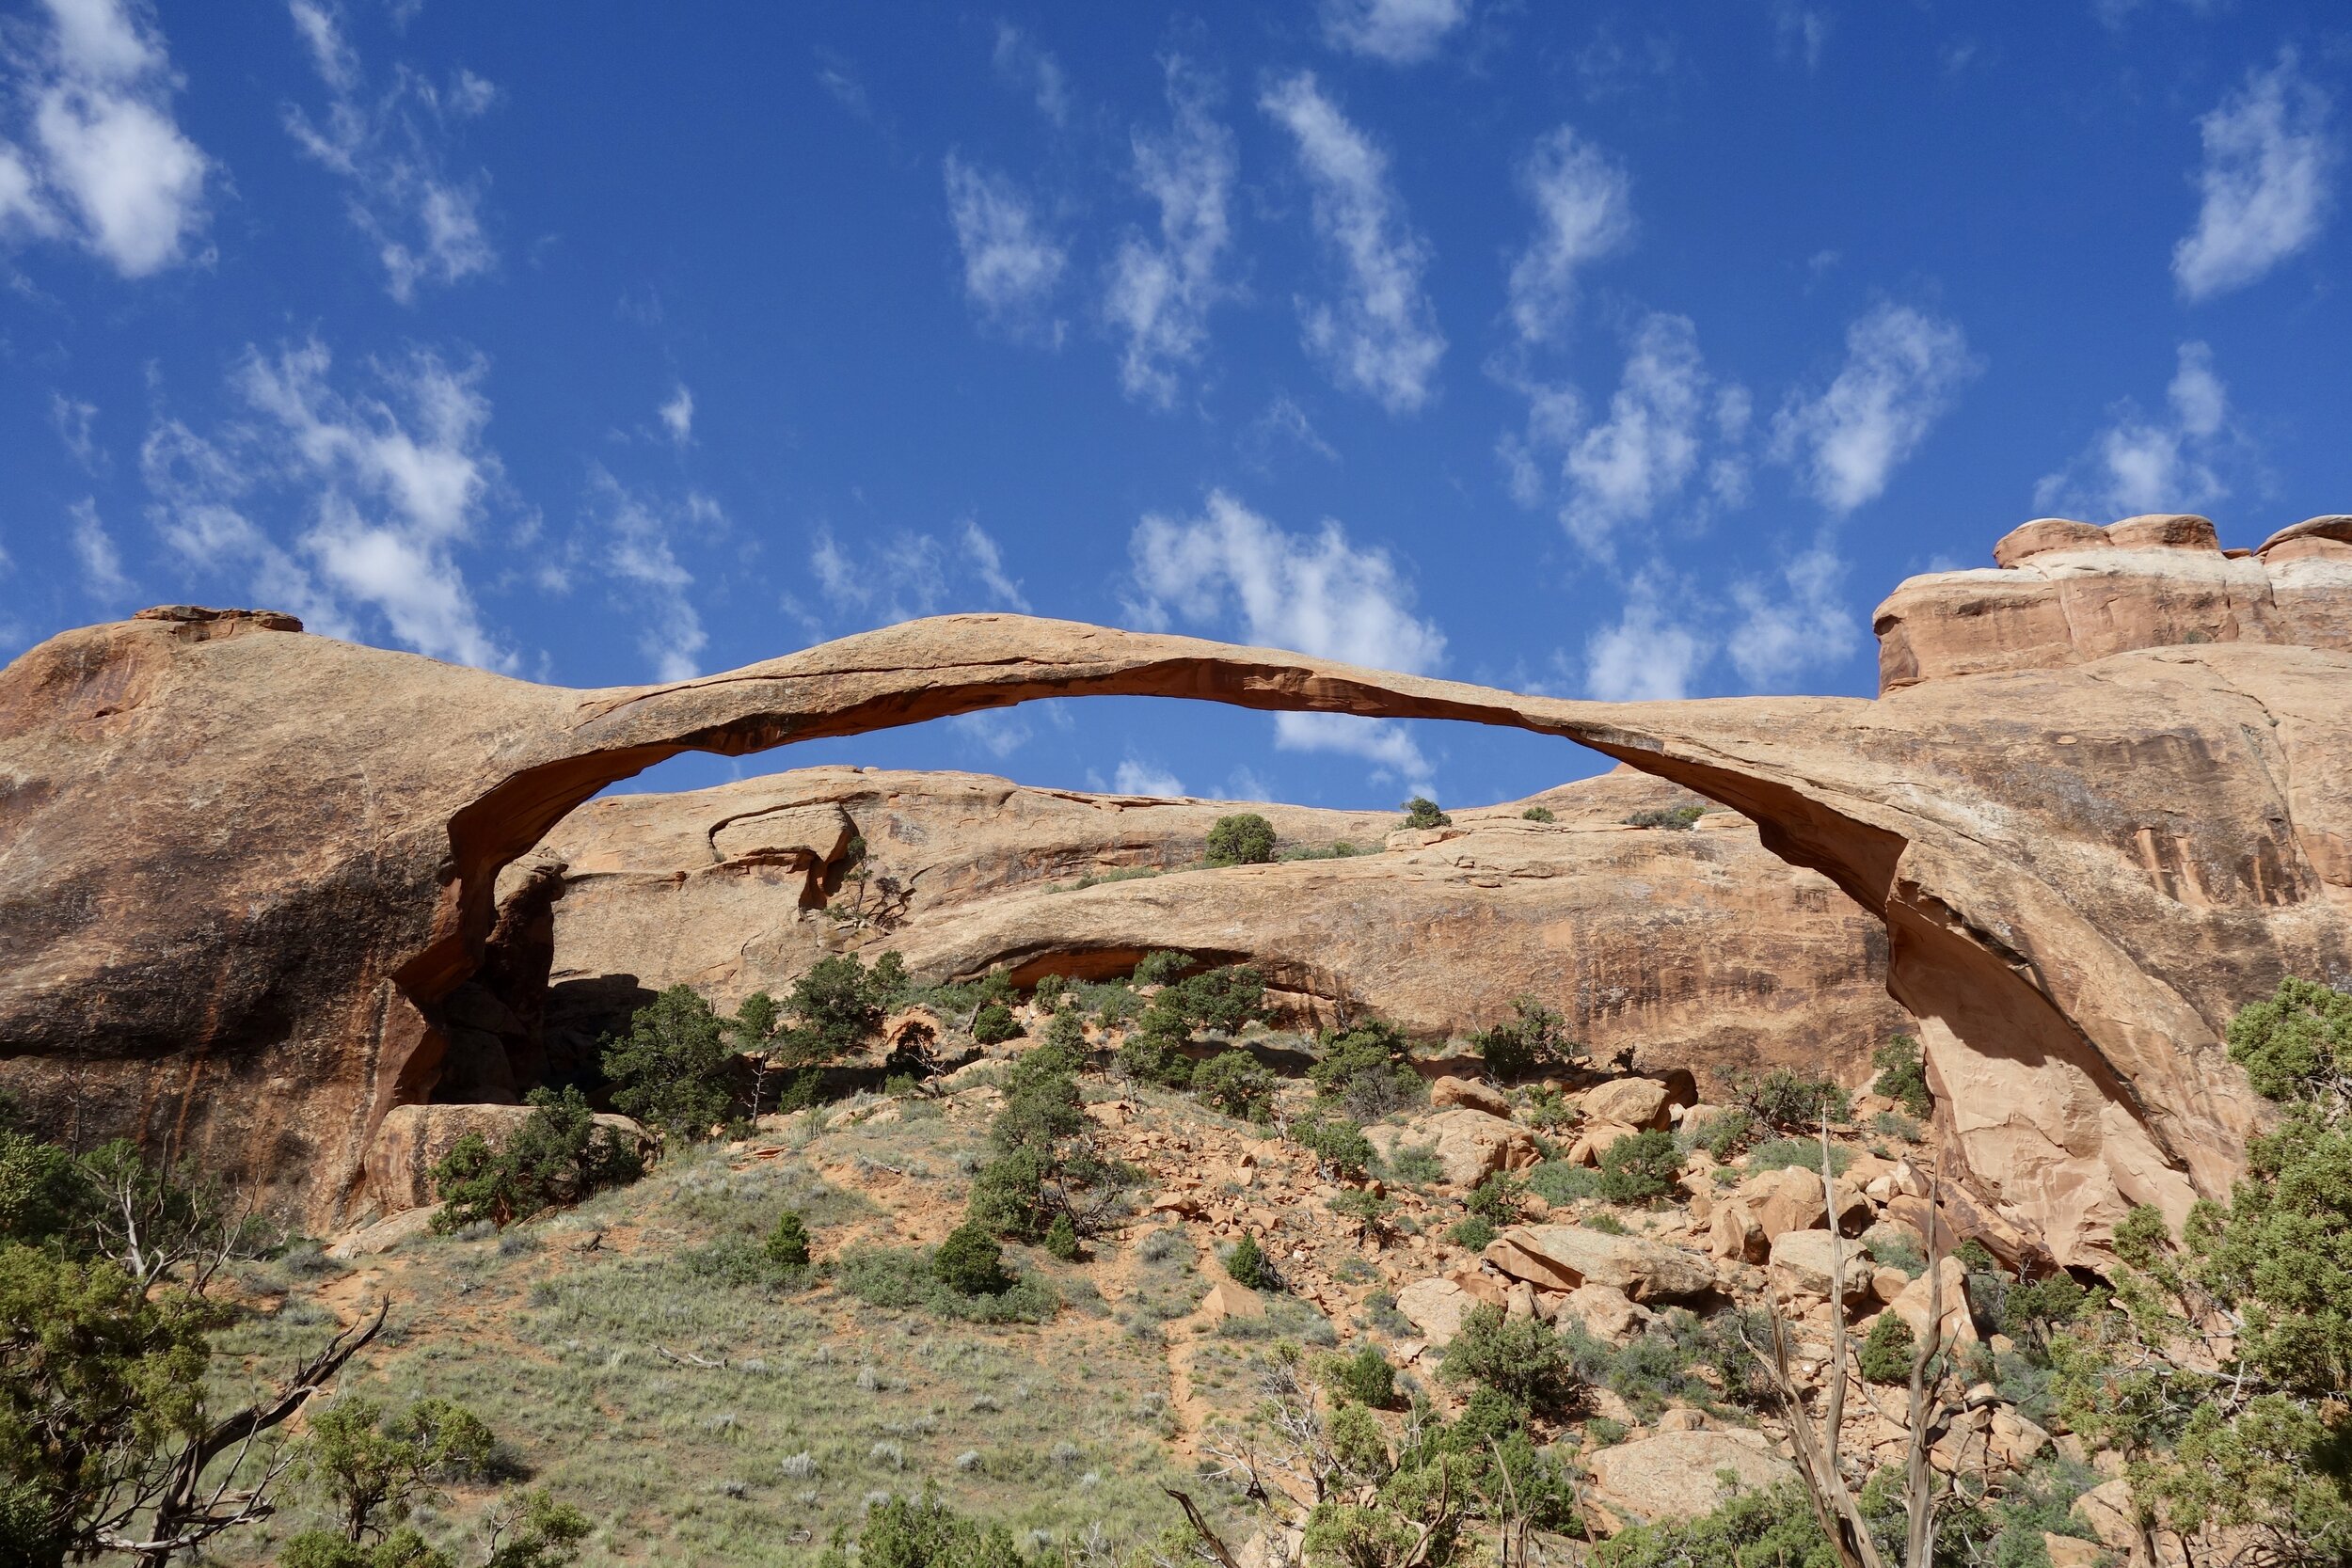 Landscape Arch, the longest arch in the park, is as long as a football field.